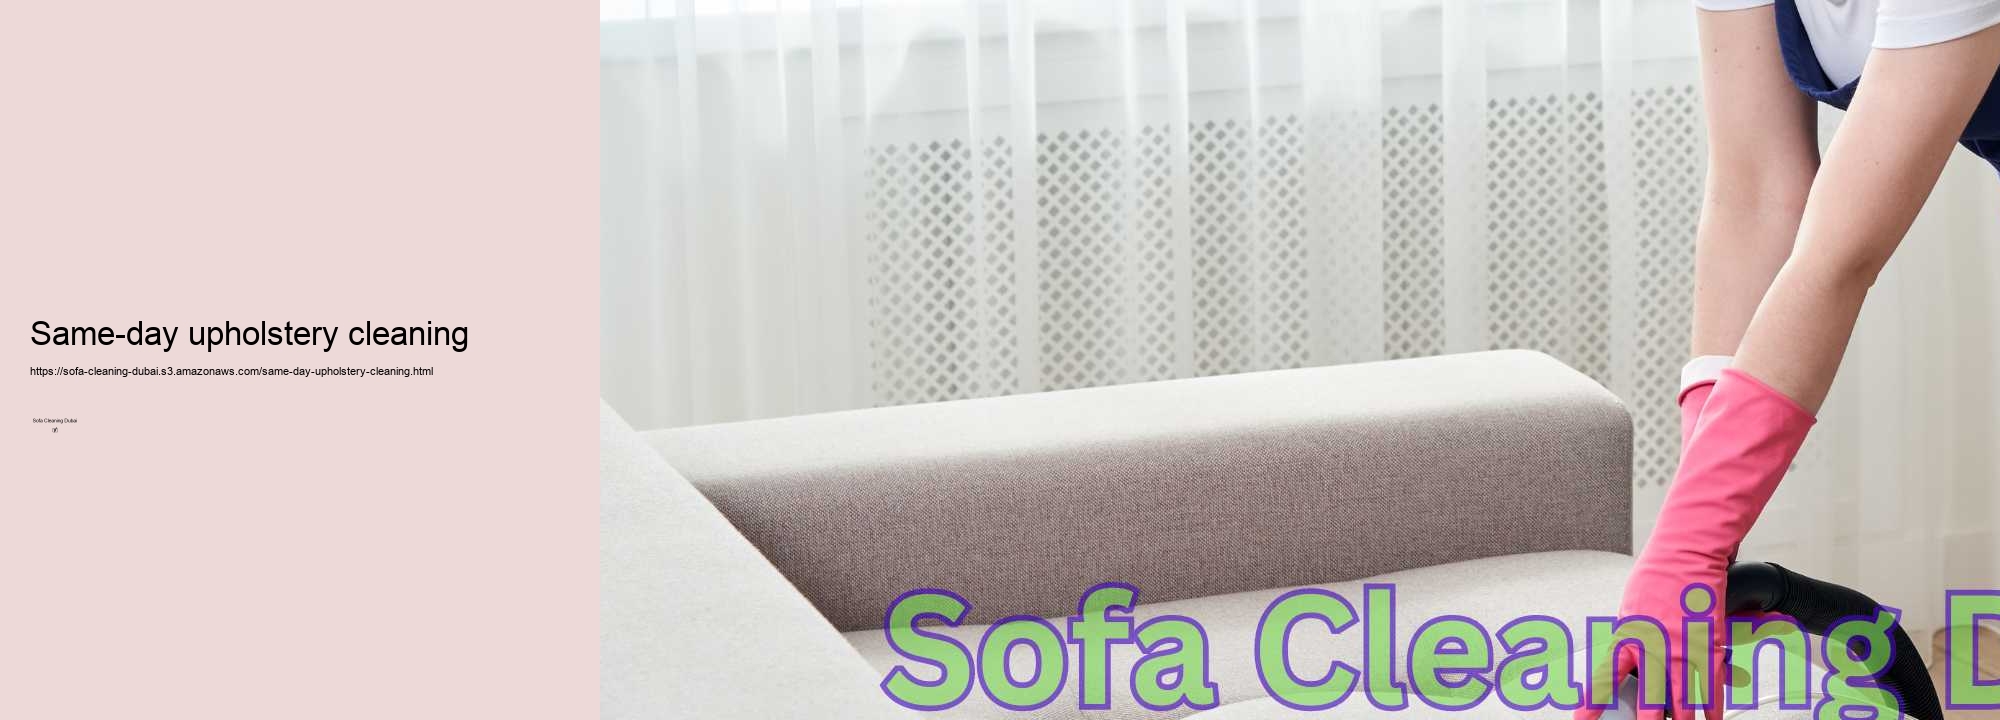 Same-day upholstery cleaning